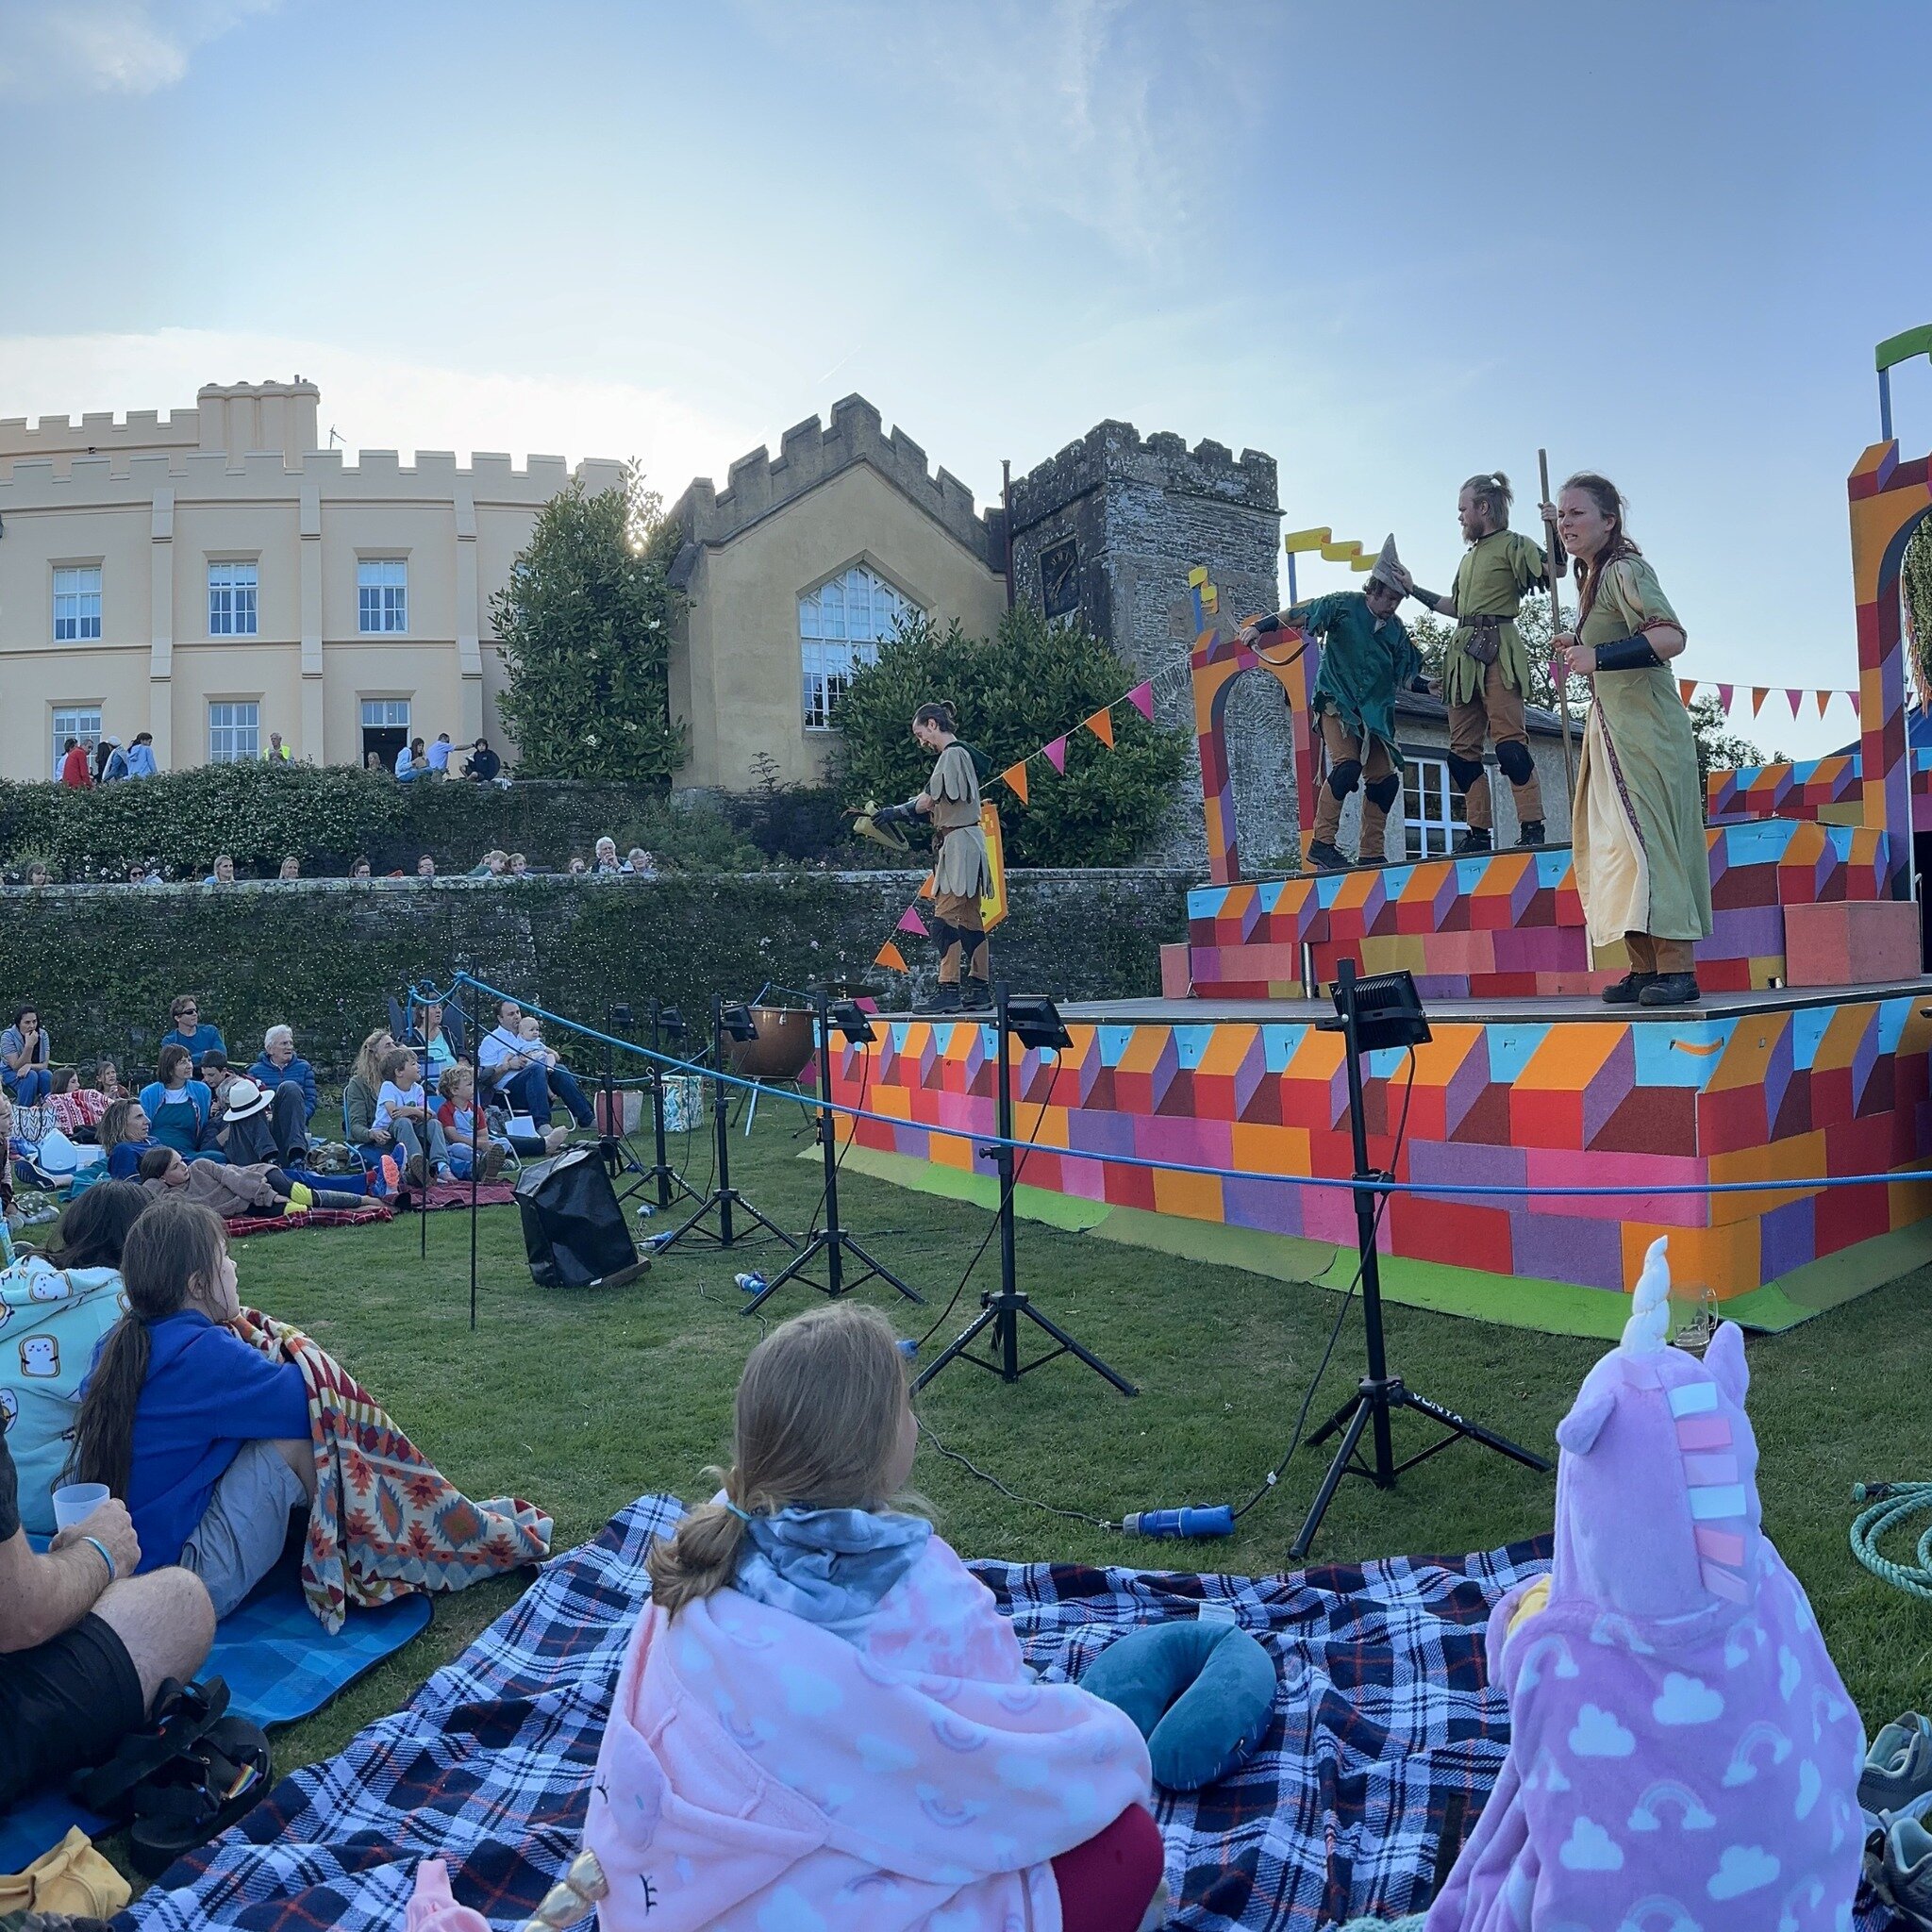 Brighter mornings and longer nights...

We can't wait to welcome you this summer to enjoy the extra hours of sunshine at our 2 open-air performances.

🎭The Gondoliers - Wednesday 17th July
🎭Hamlet - Wednesday 24th July 

You can book your tickets f